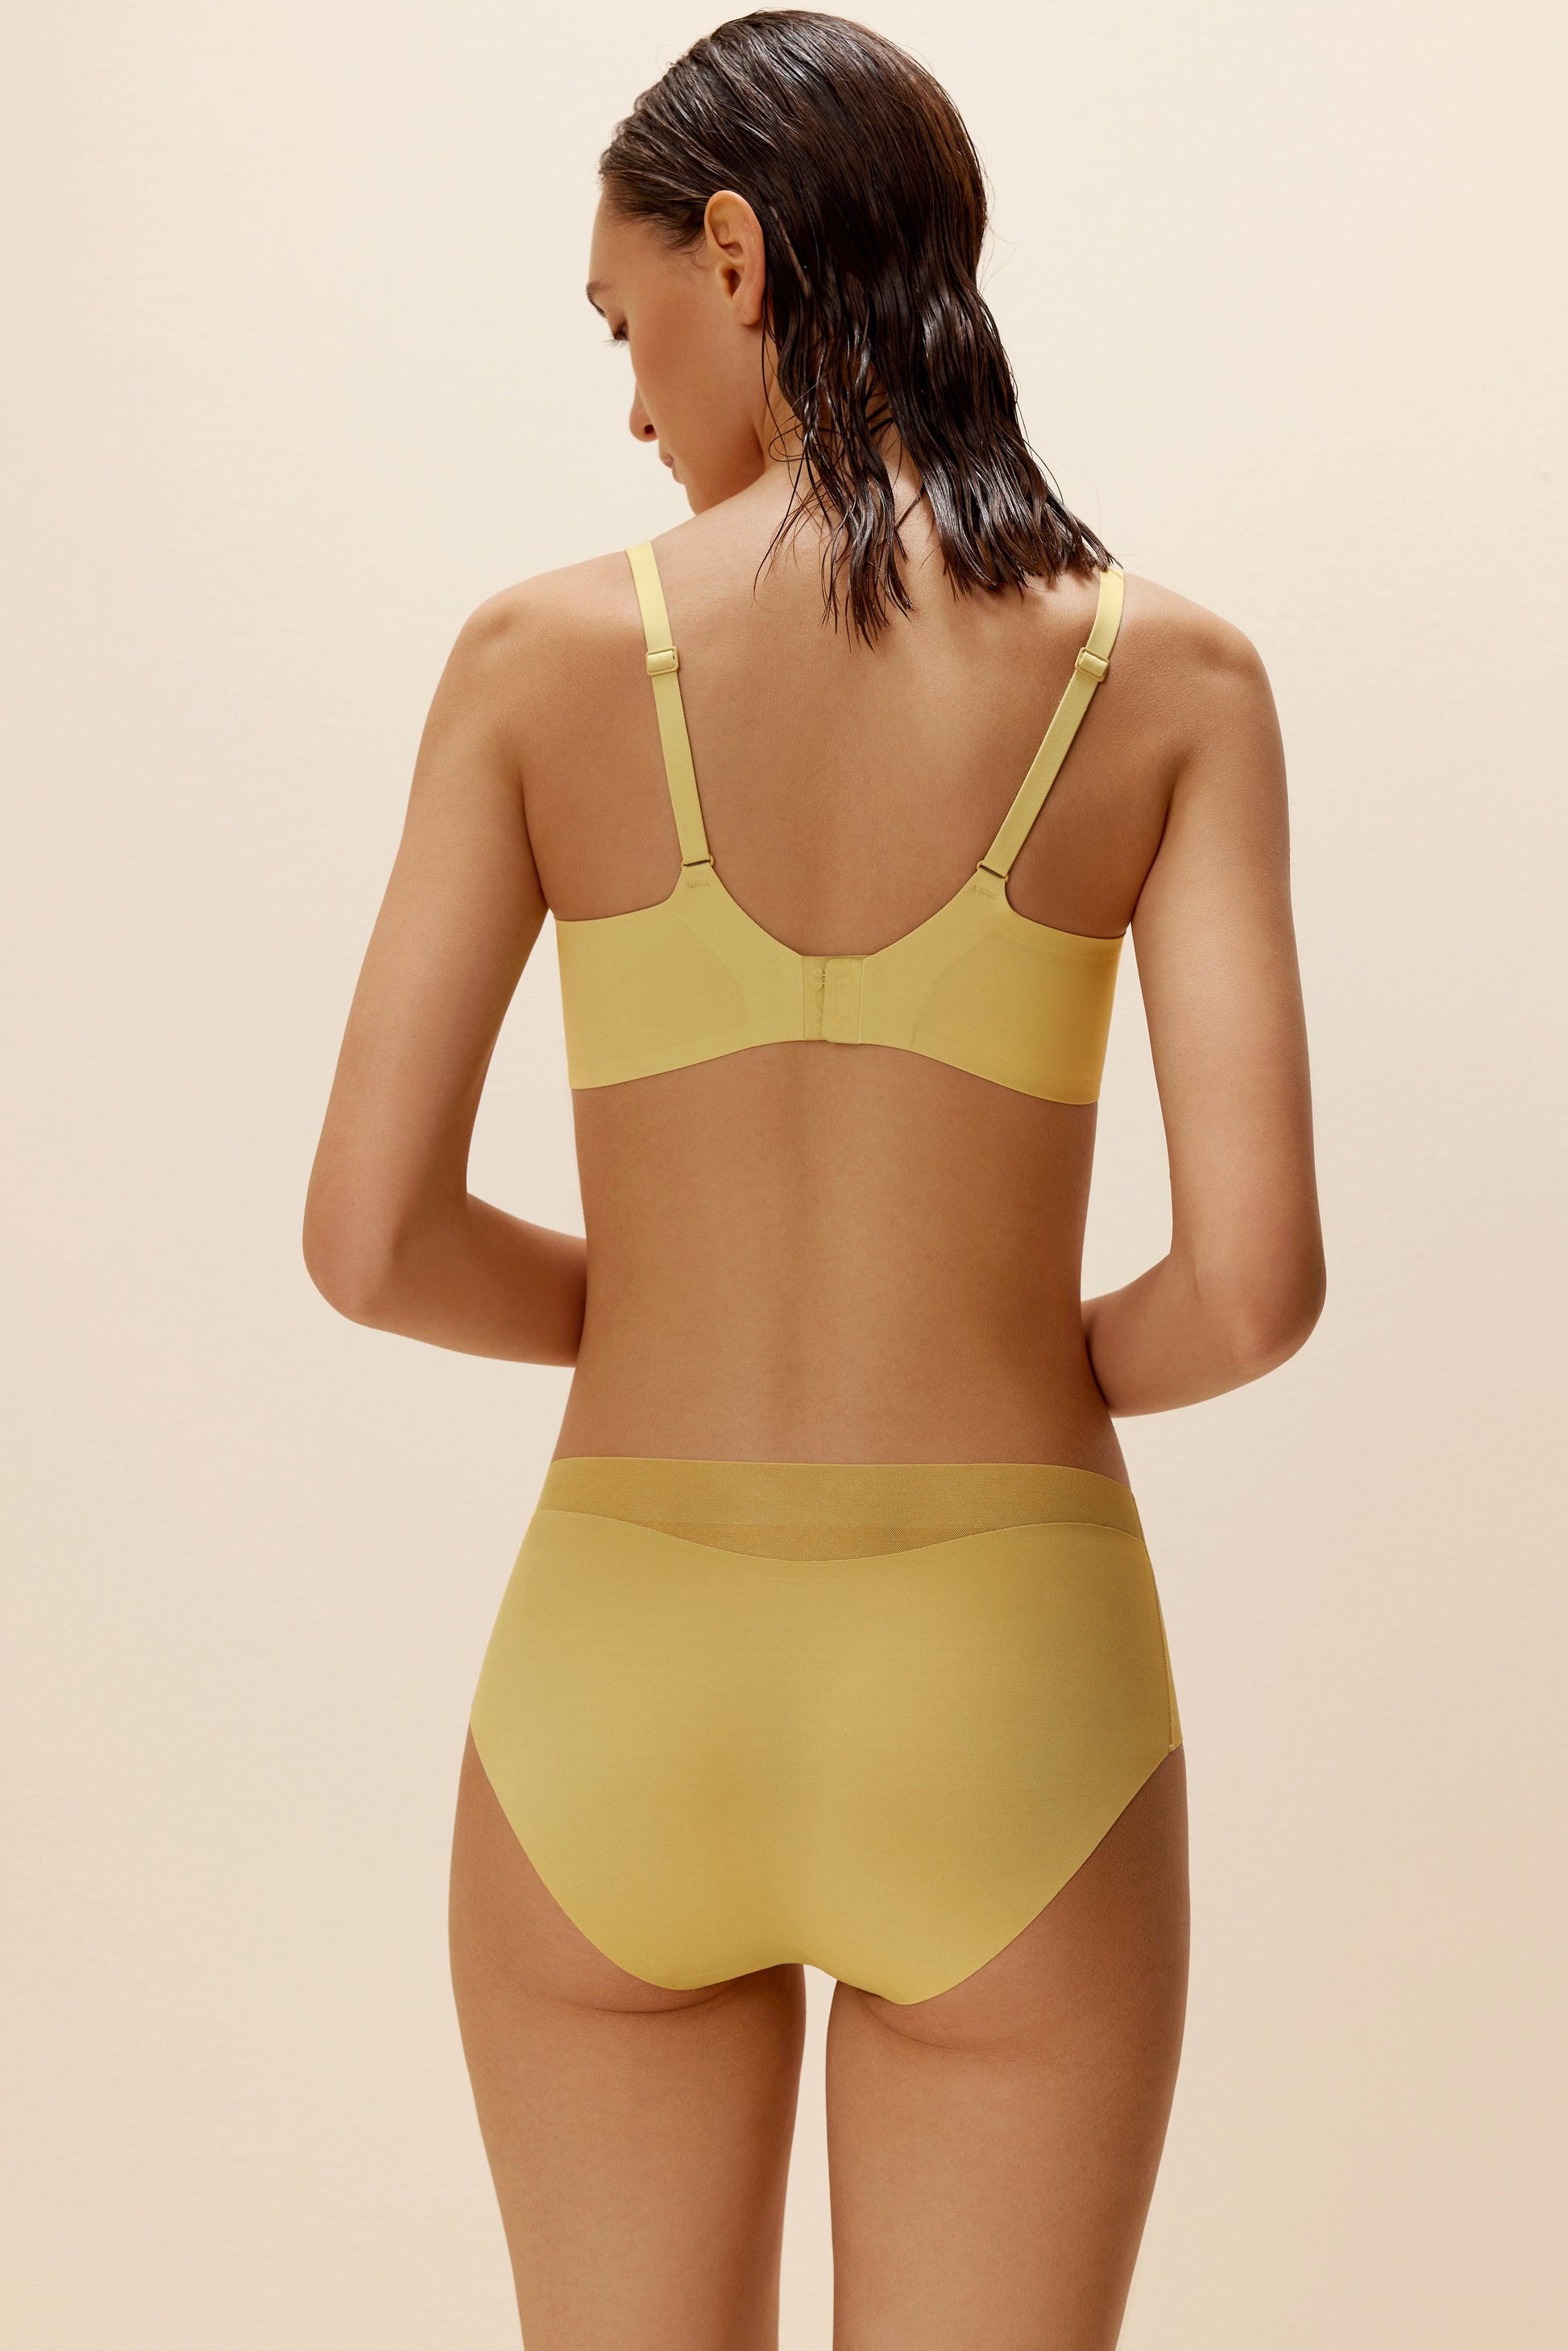 woman wearing yellow bra and brief back